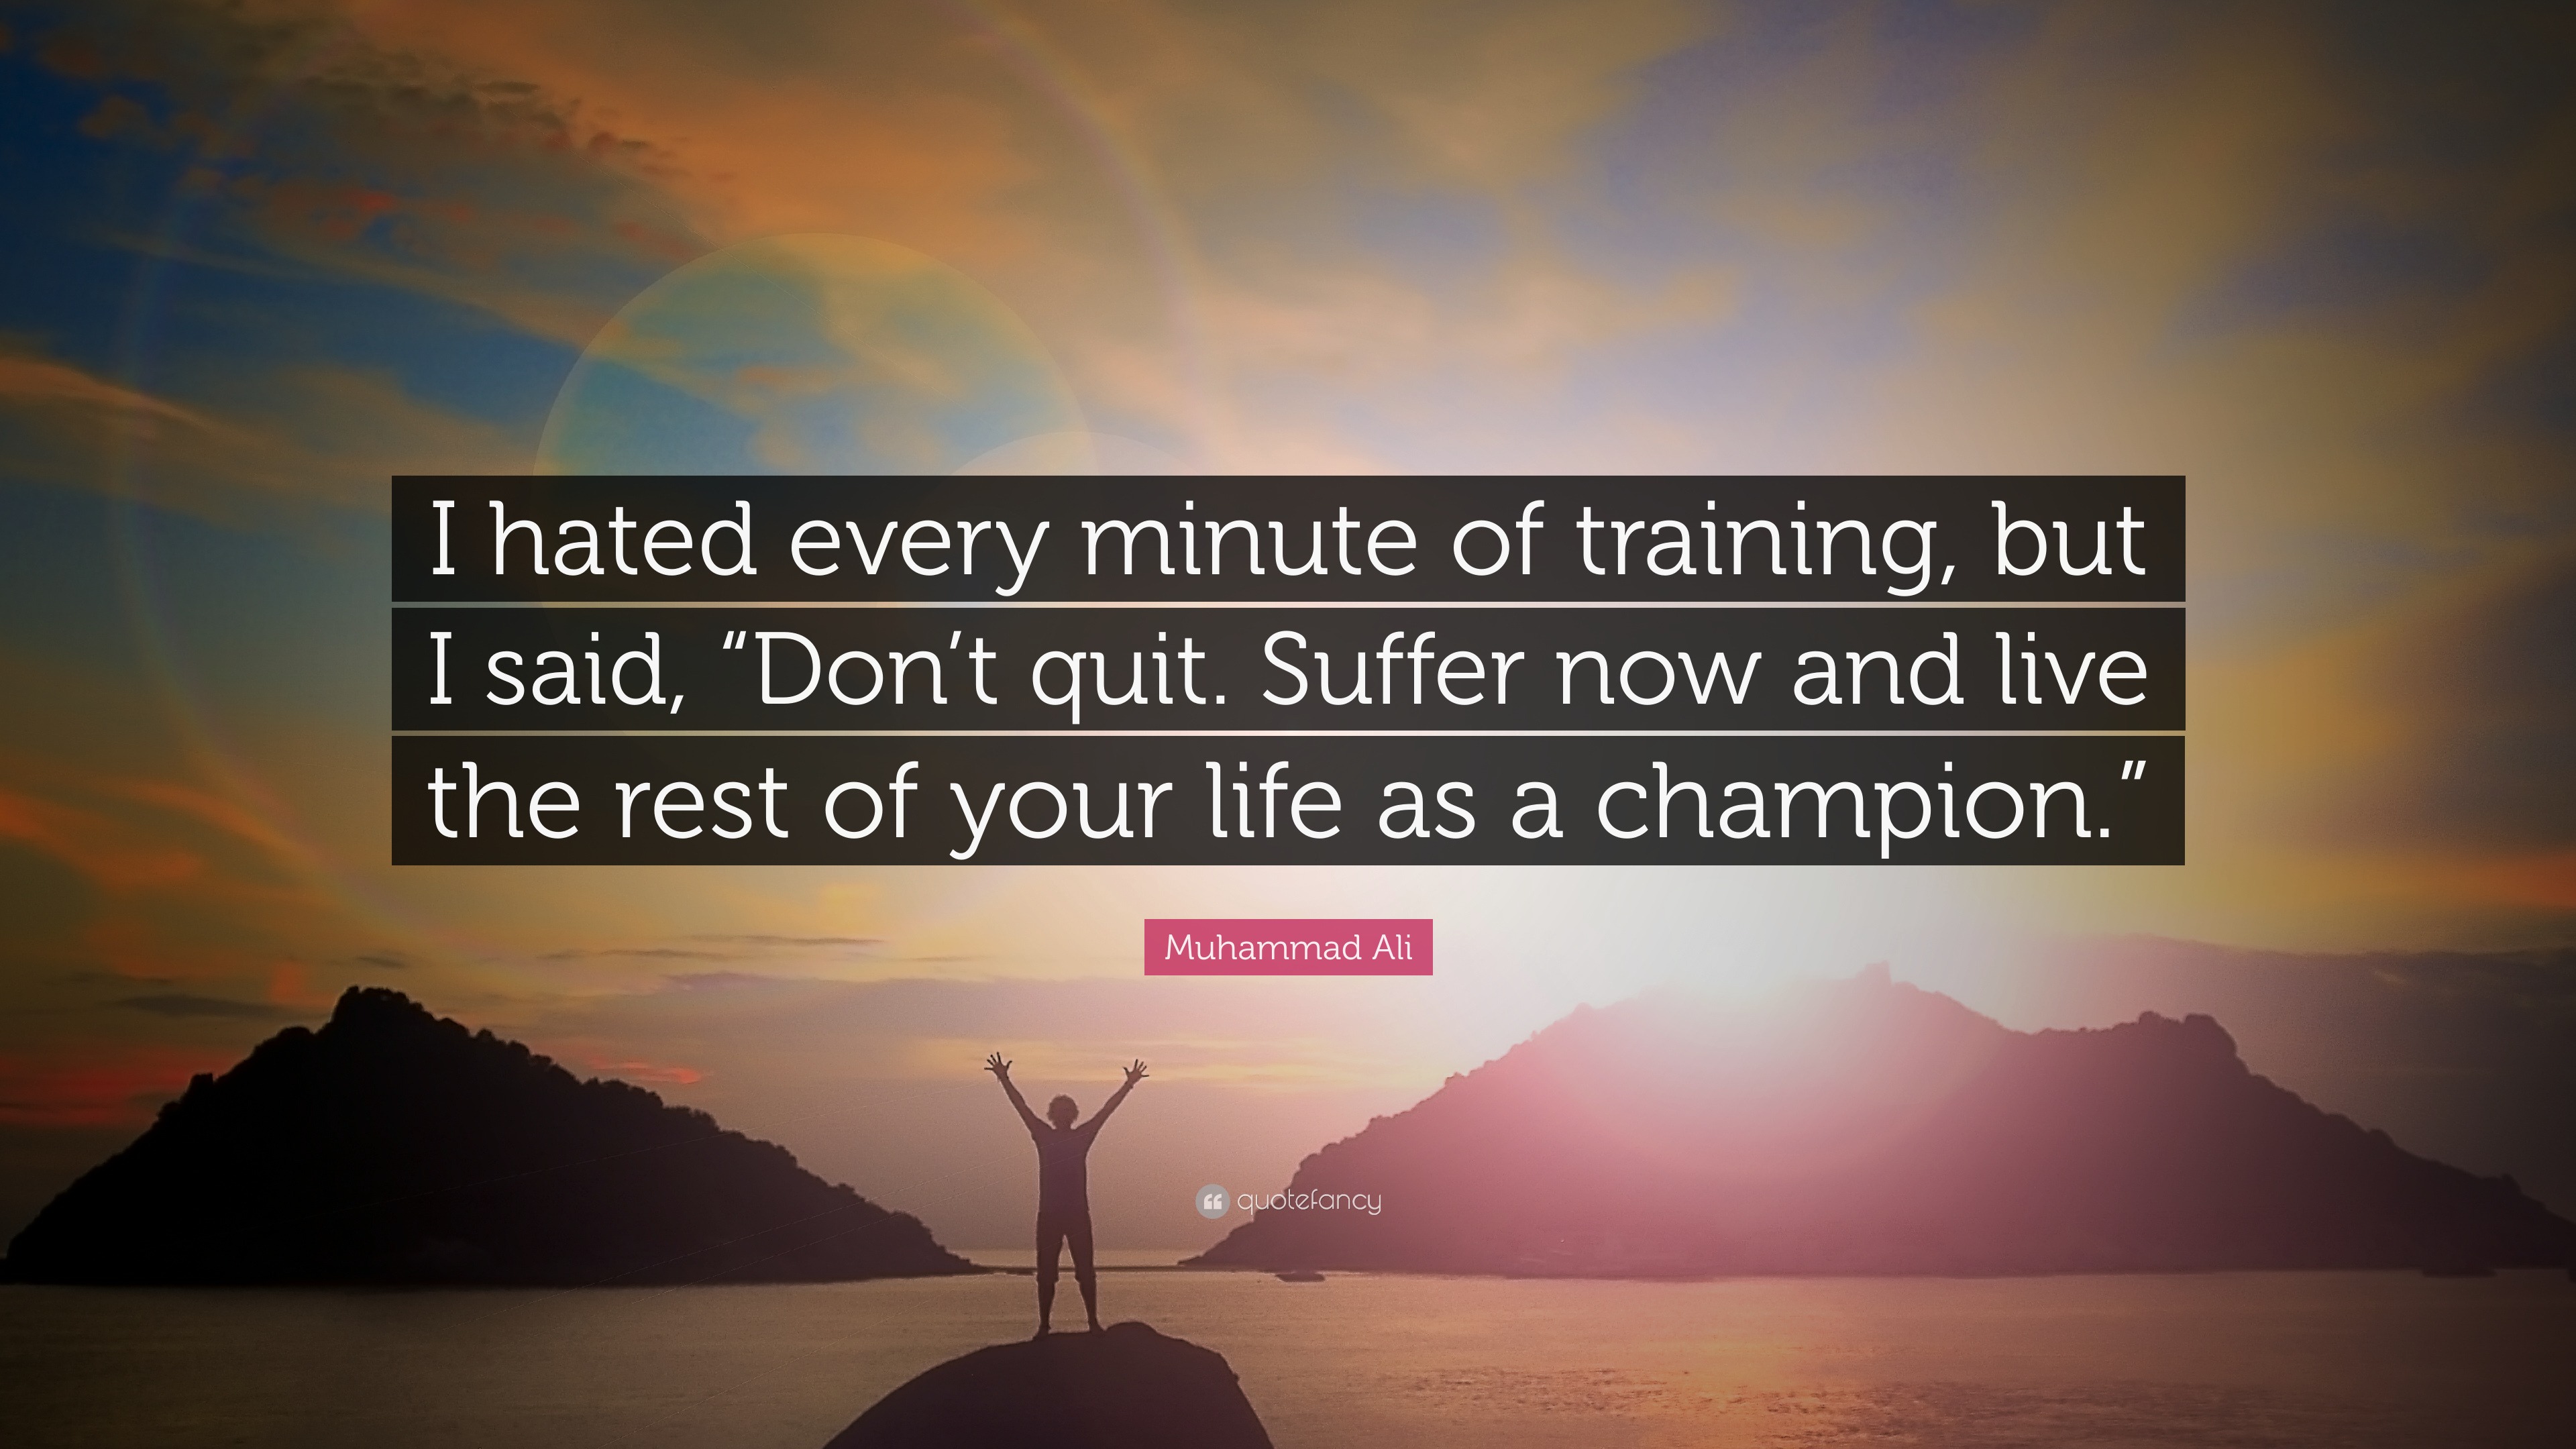 Muhammad Ali Quote: “I hated every minute of training, but I said, “Don